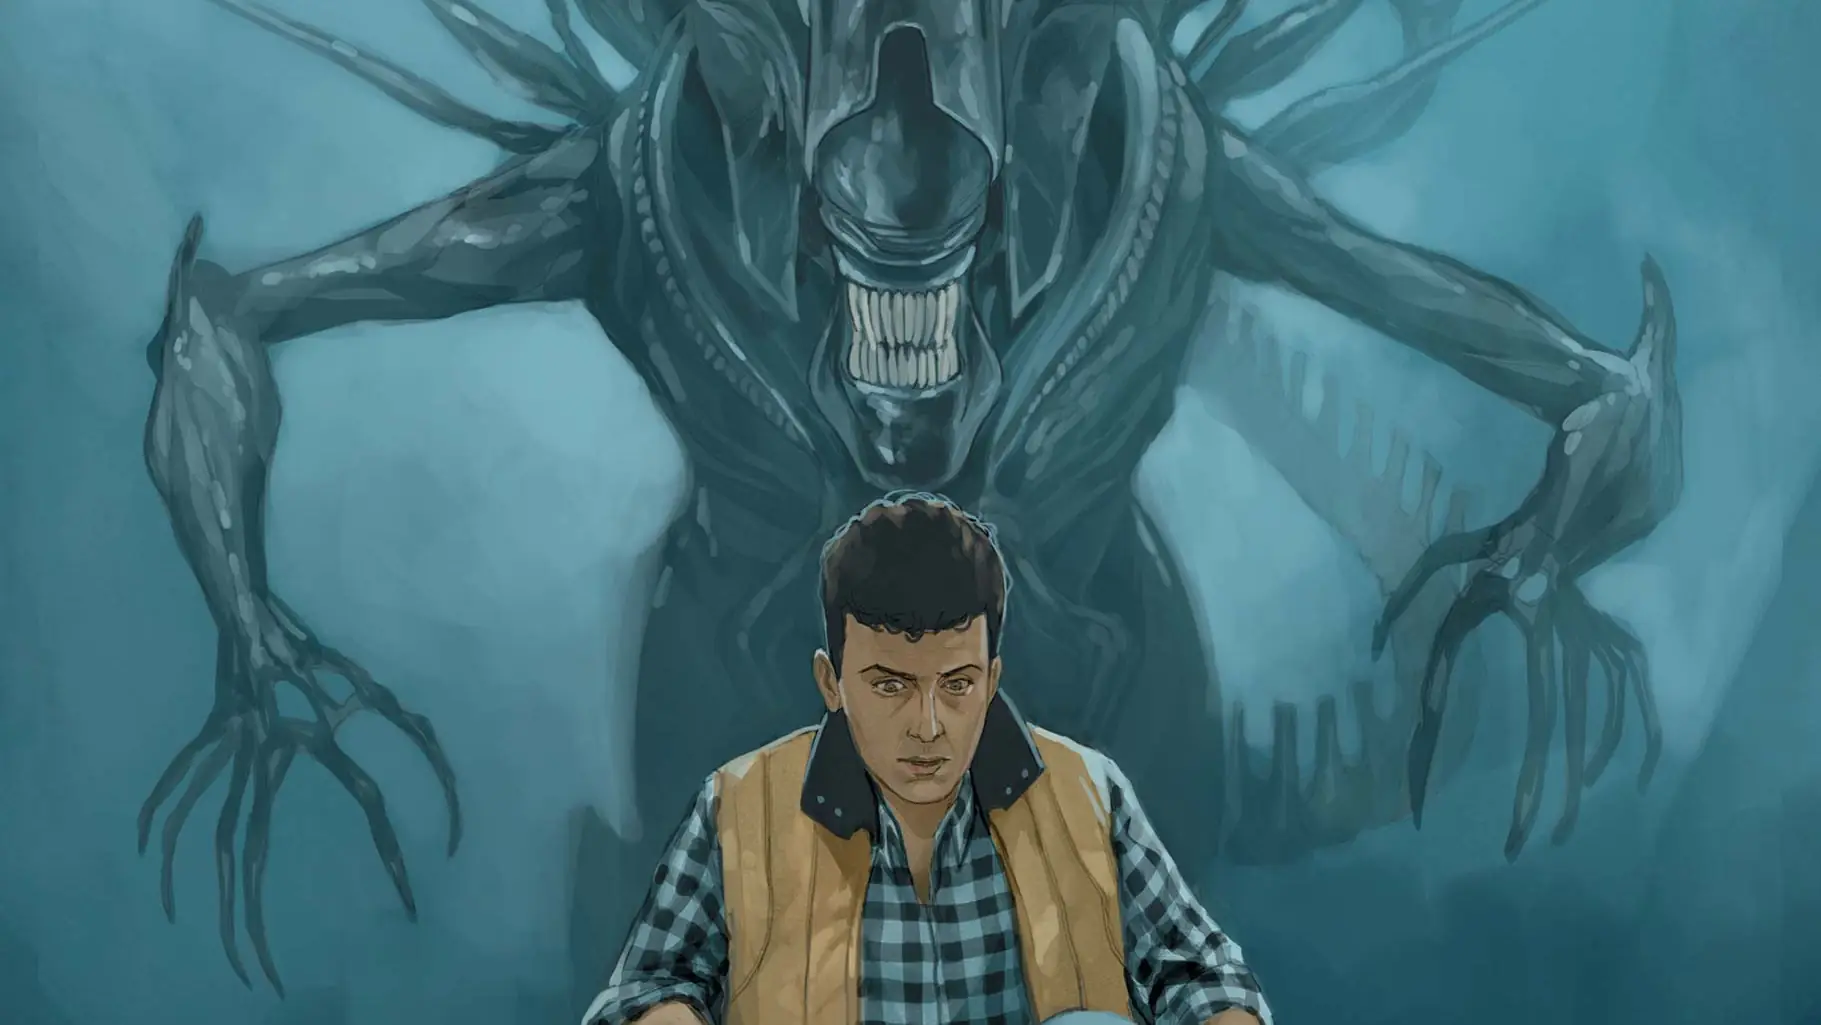 Aliens: What If...? (2024)